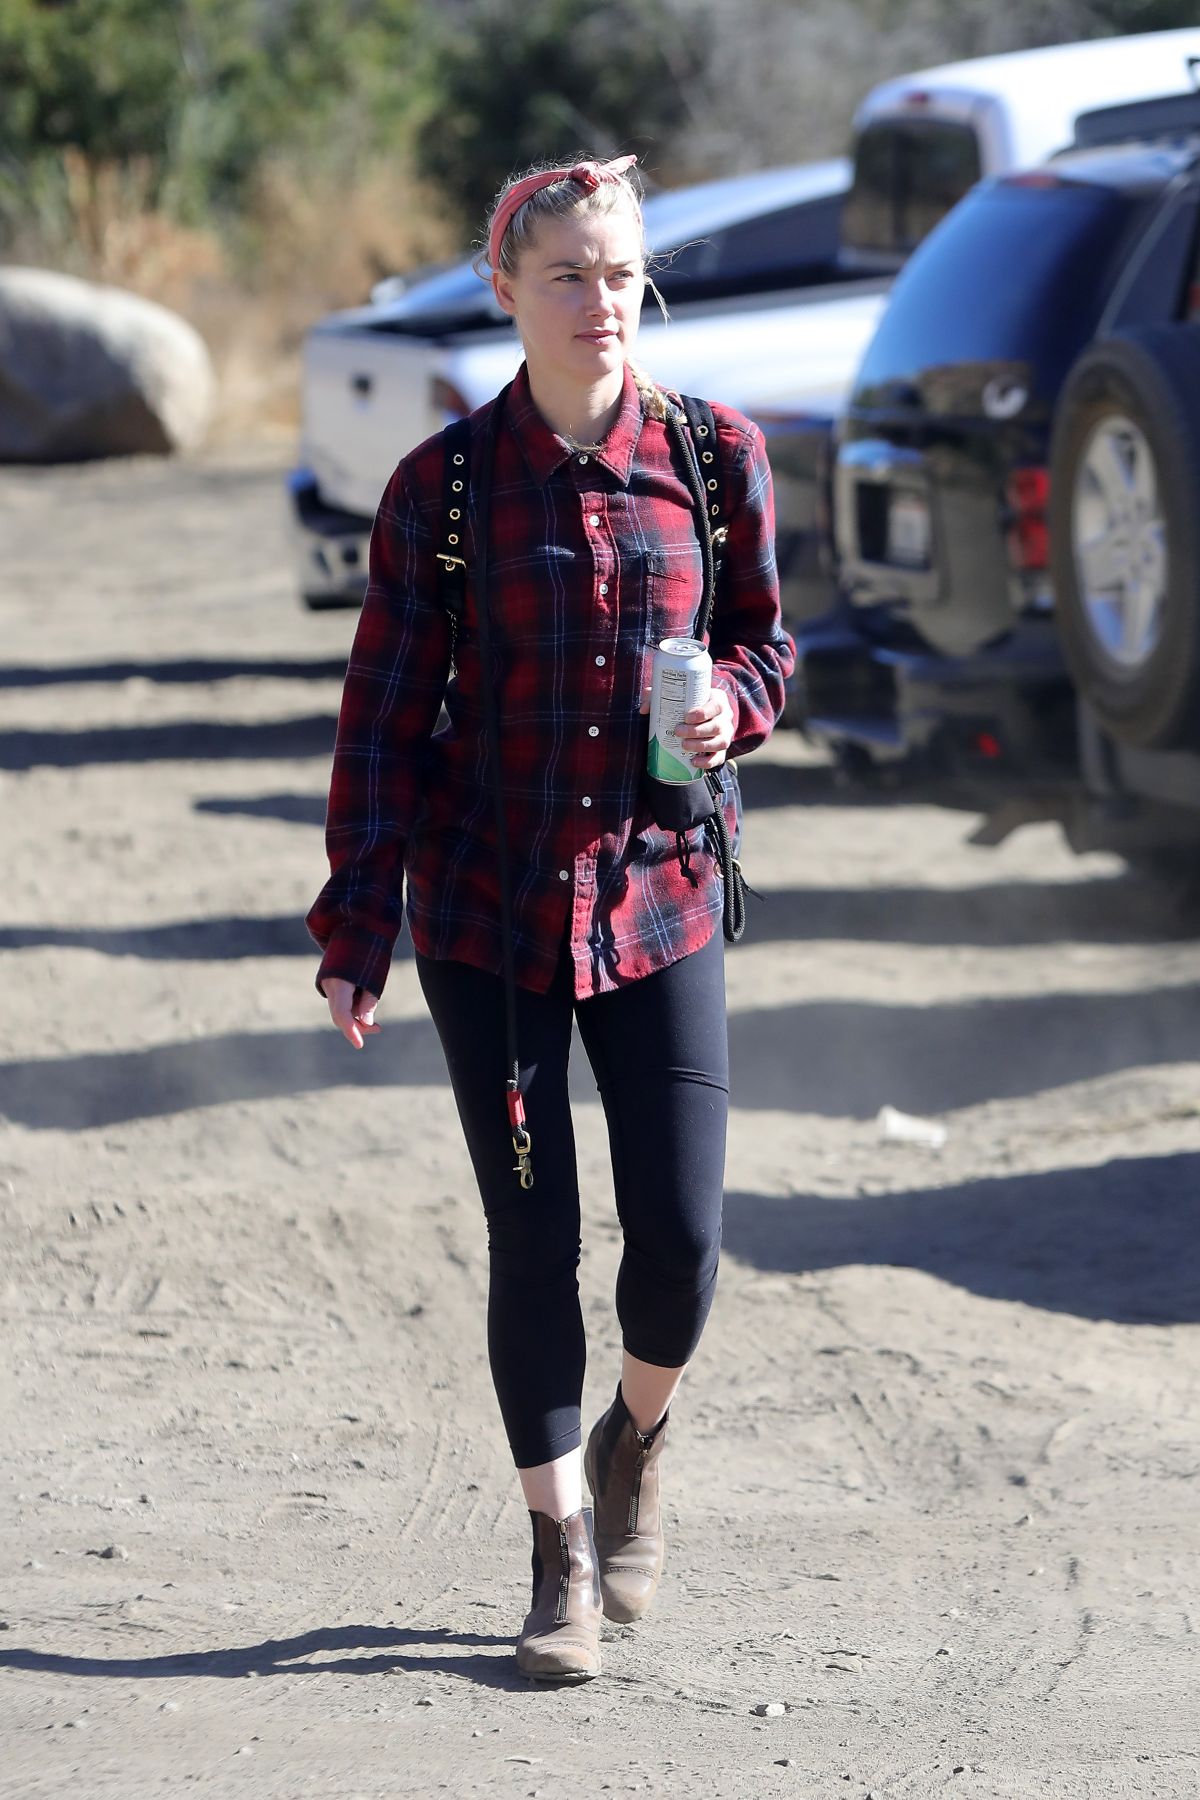 amber-heard-out-hiking-in-los-angeles-11-13-2020-4.jpg